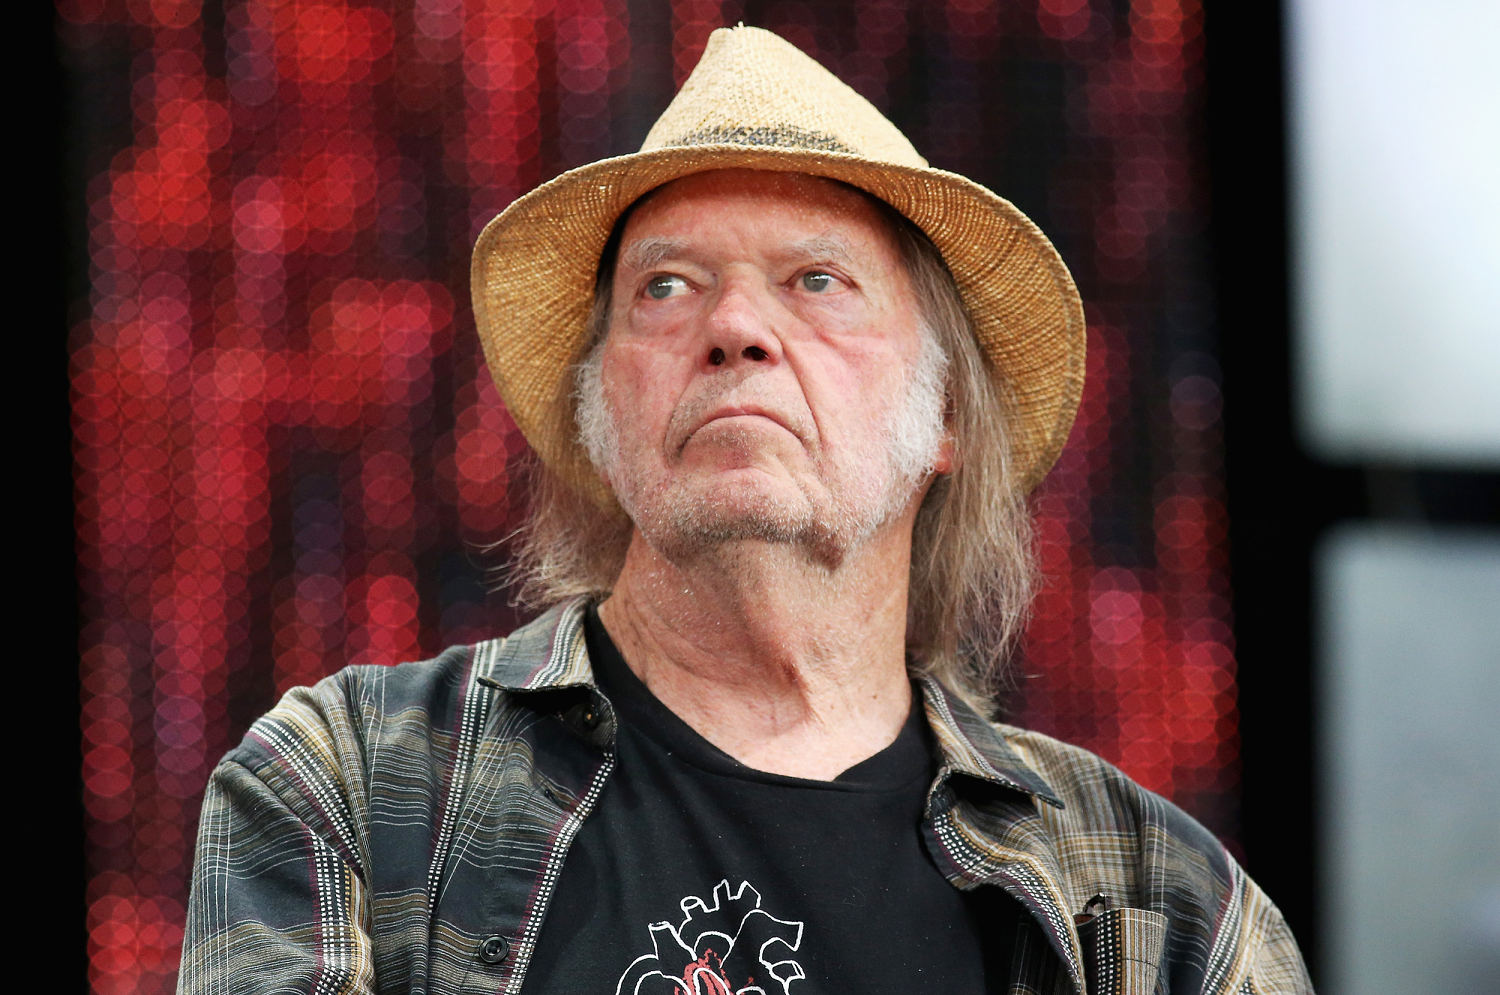 Neil Young says he’s returning to Spotify, 2 years after exit over Joe Rogan’s podcast